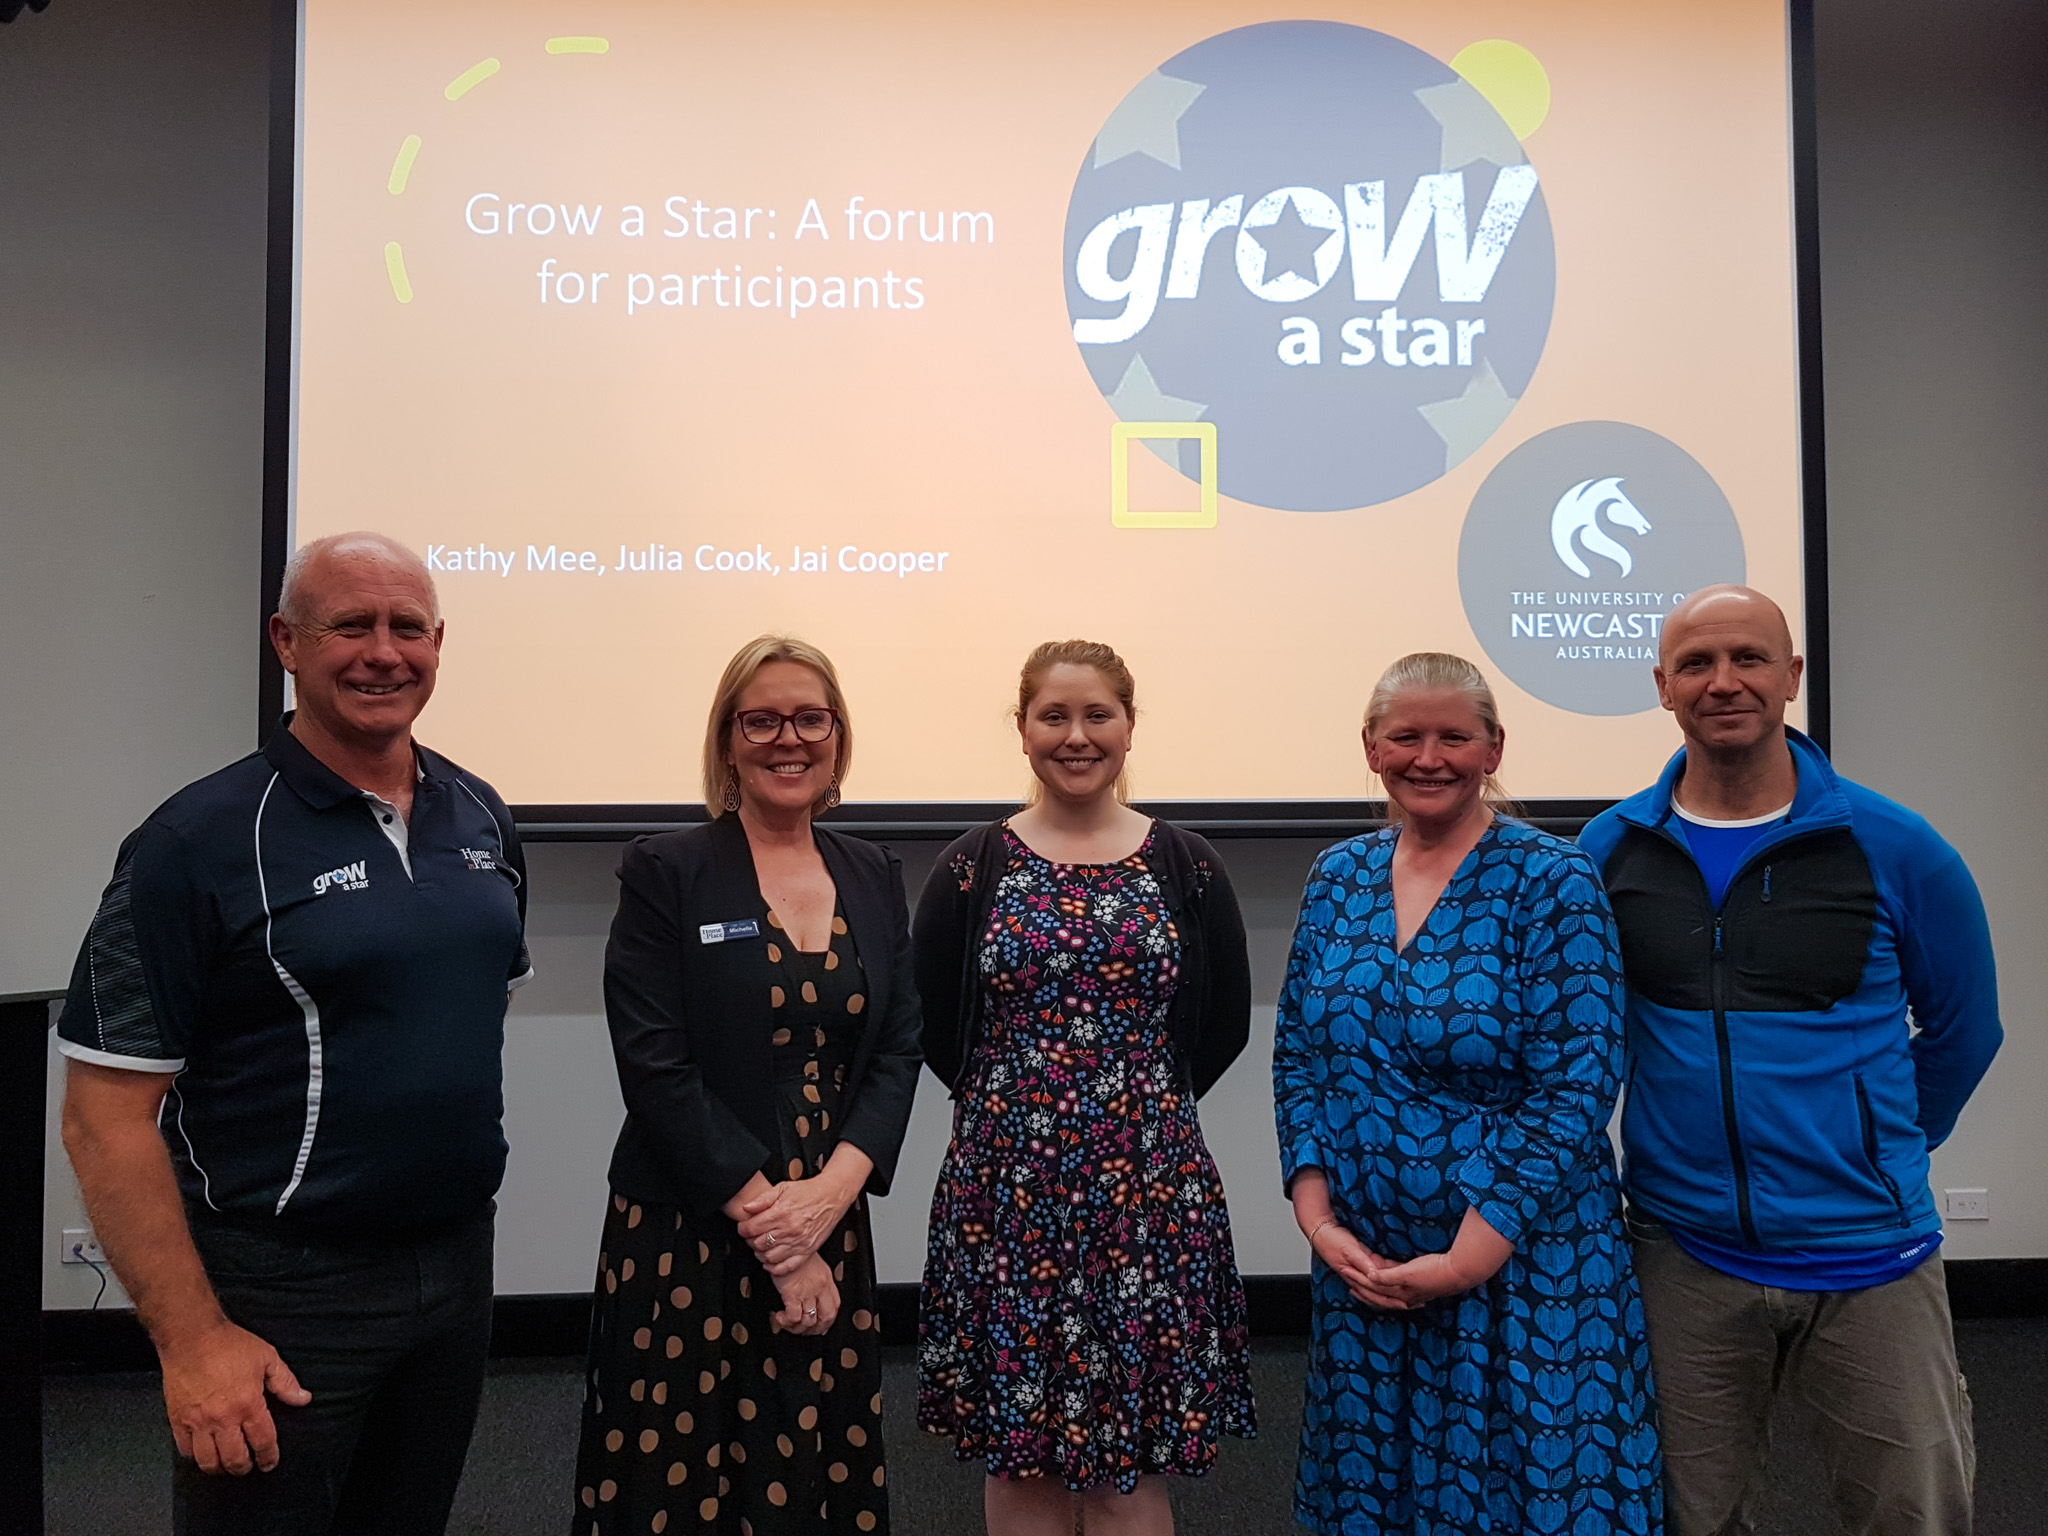 Left to Right - Shane Marshall (Grow a Star), Michelle Faithful (Grow a Star), Dr Julia Cook (UON), A. Prof. Kathy Mee (UON) and Dr Jai Cooper (UON) at the Grow a Star research launch event